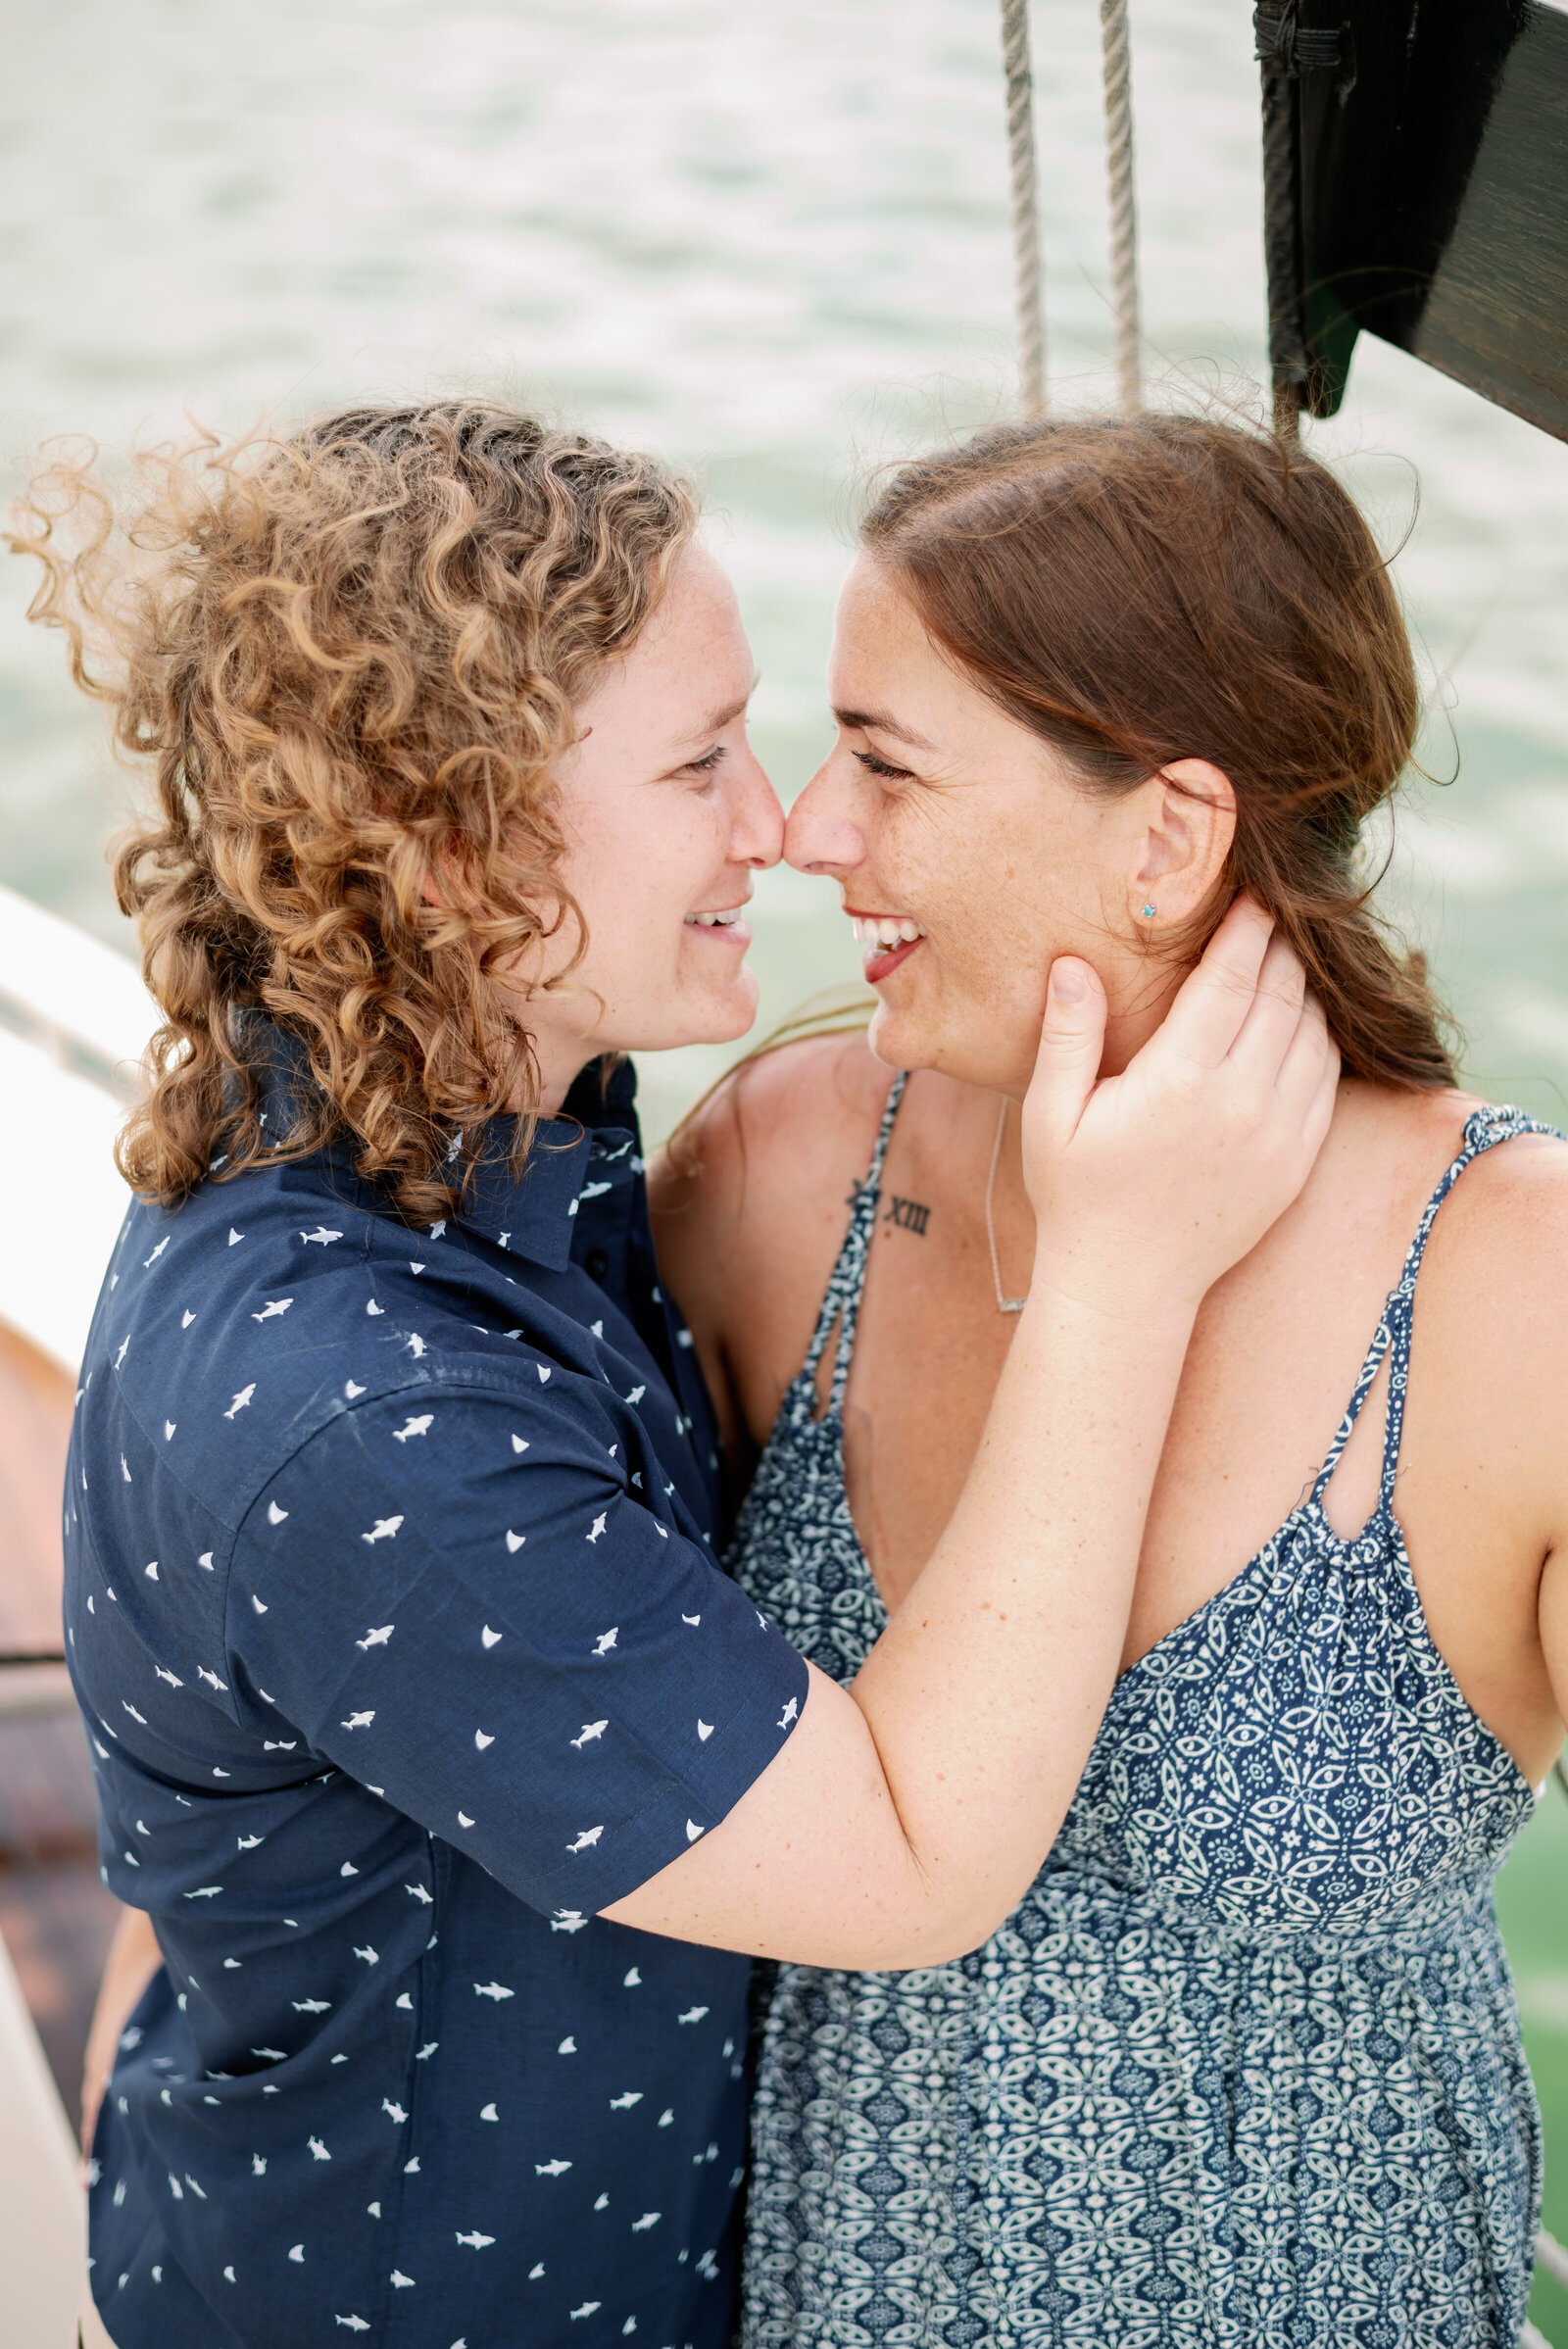 engaged couple about to kiss. One woman has her hand on the others neck, fingers just under her ear gently. Both are smiling